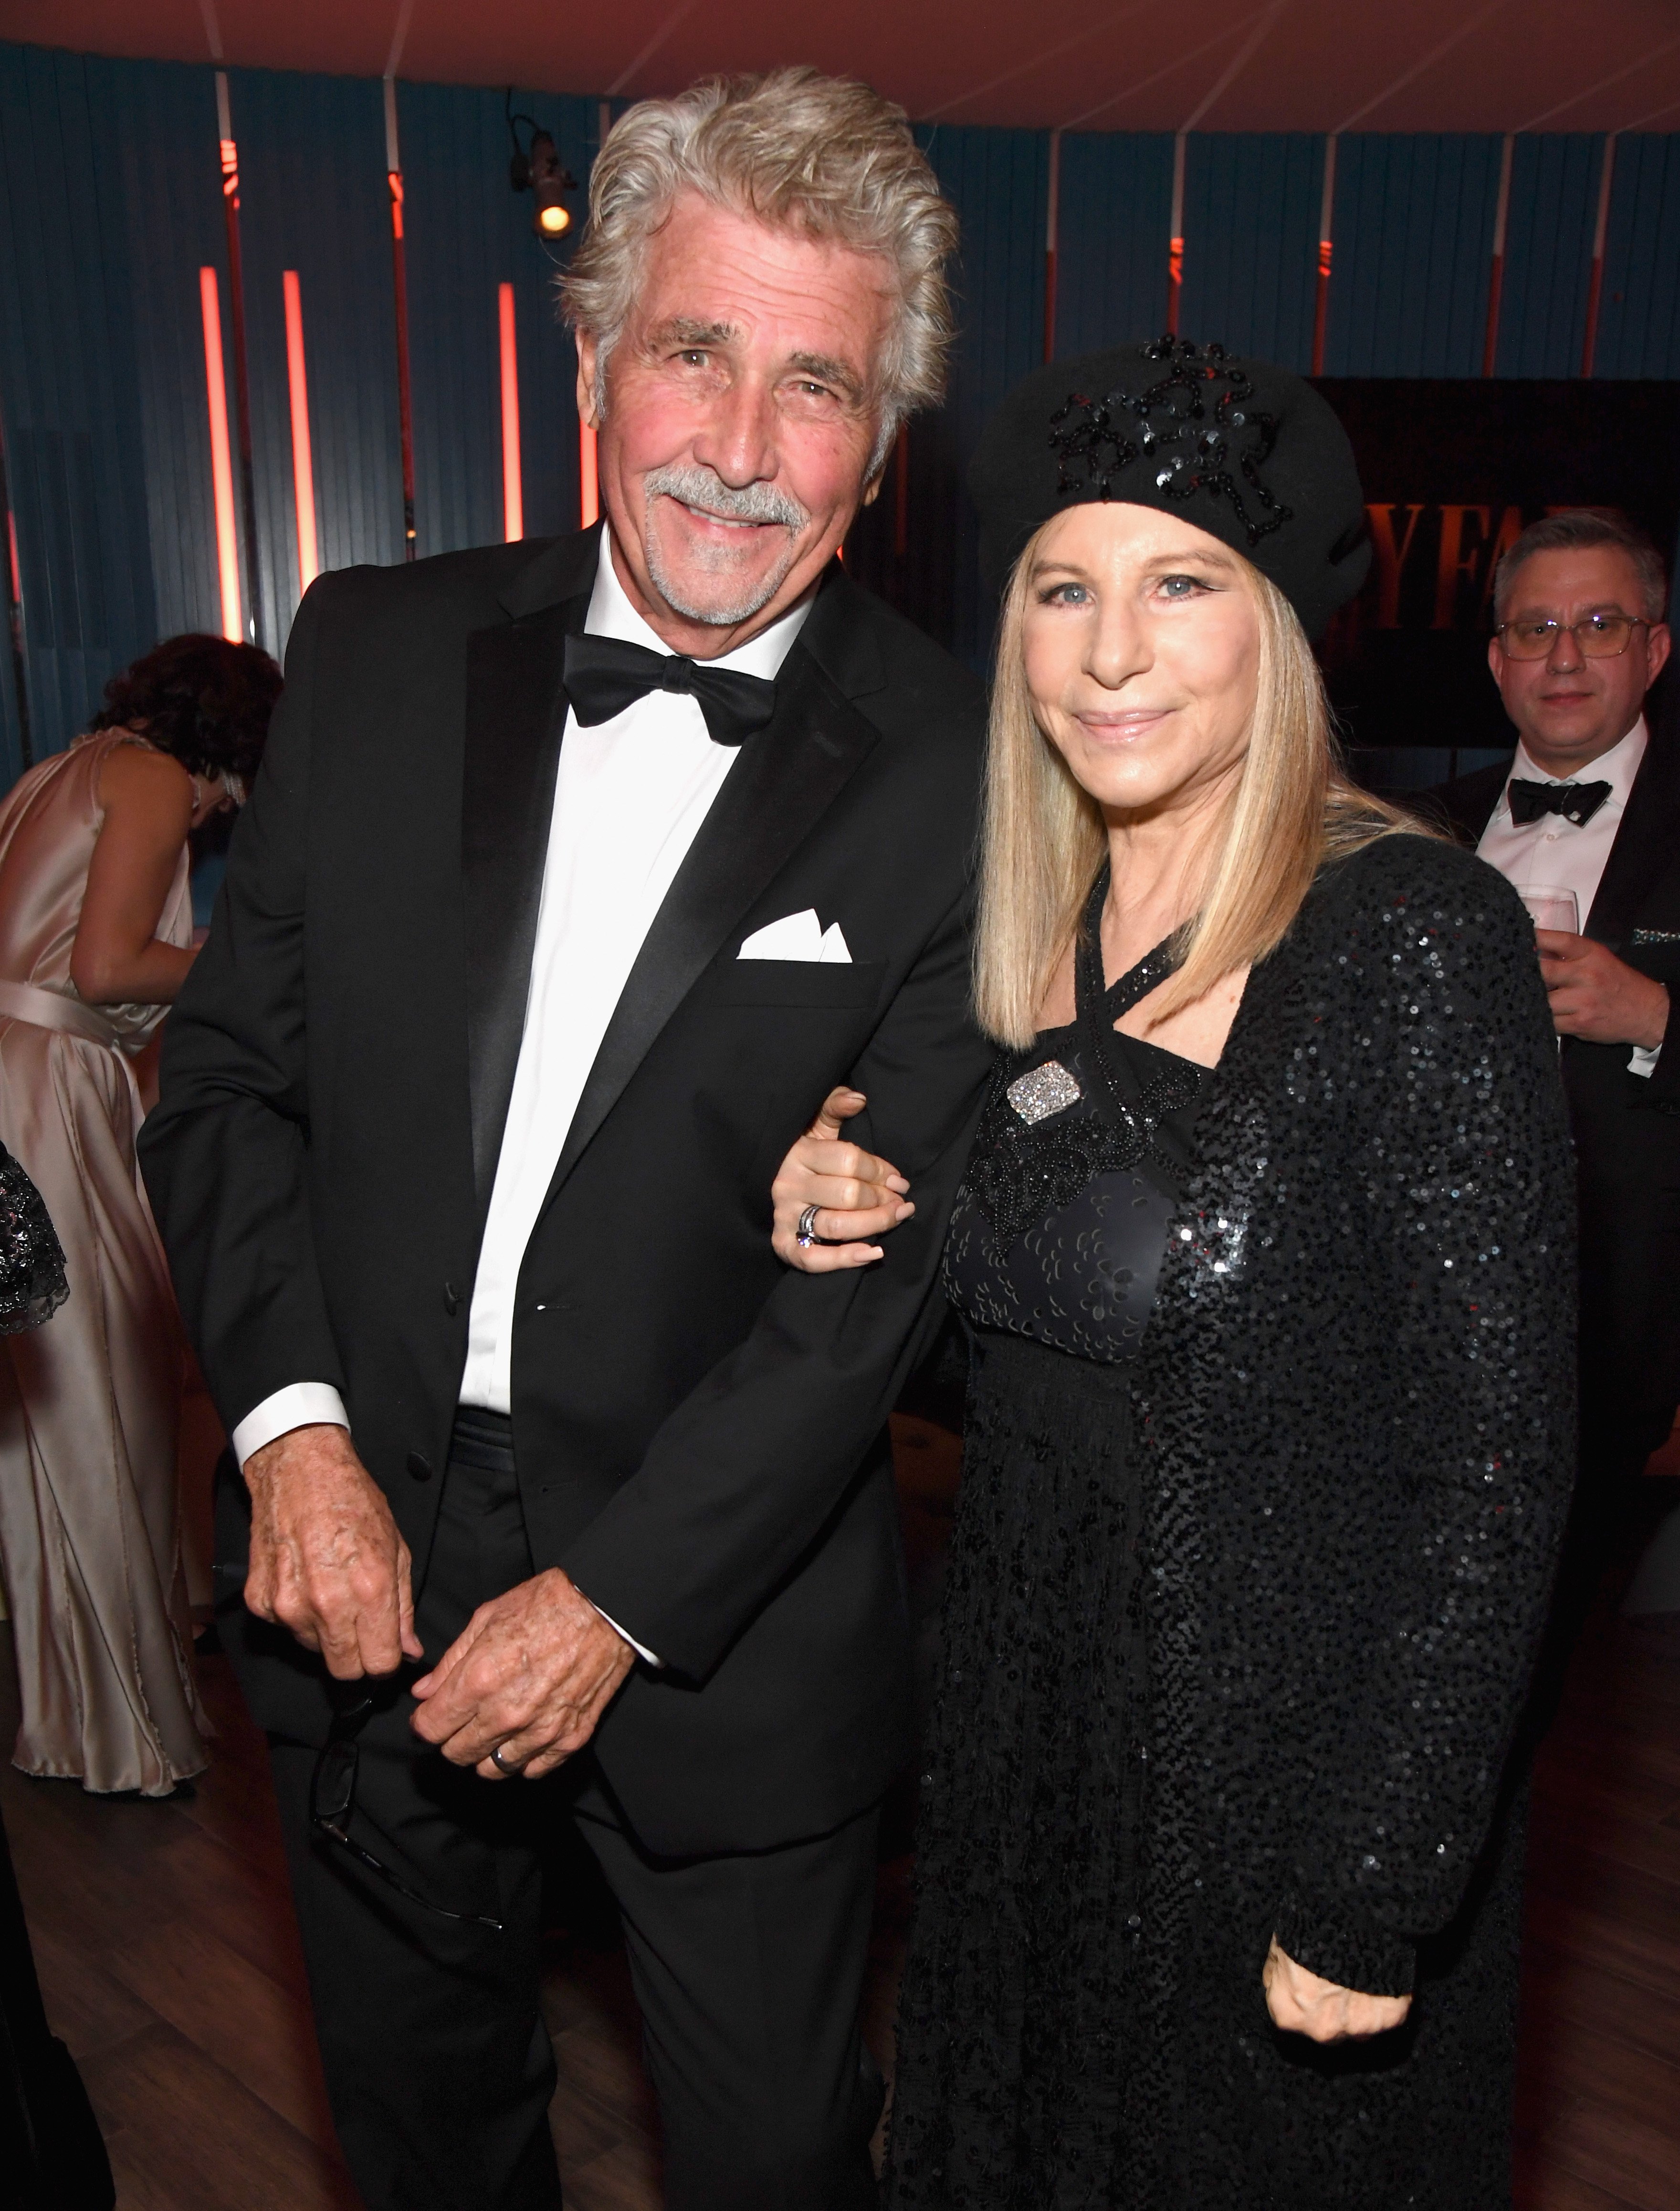 Barbara Streisand and James Brolin in California in 2019. | Source: Getty Images